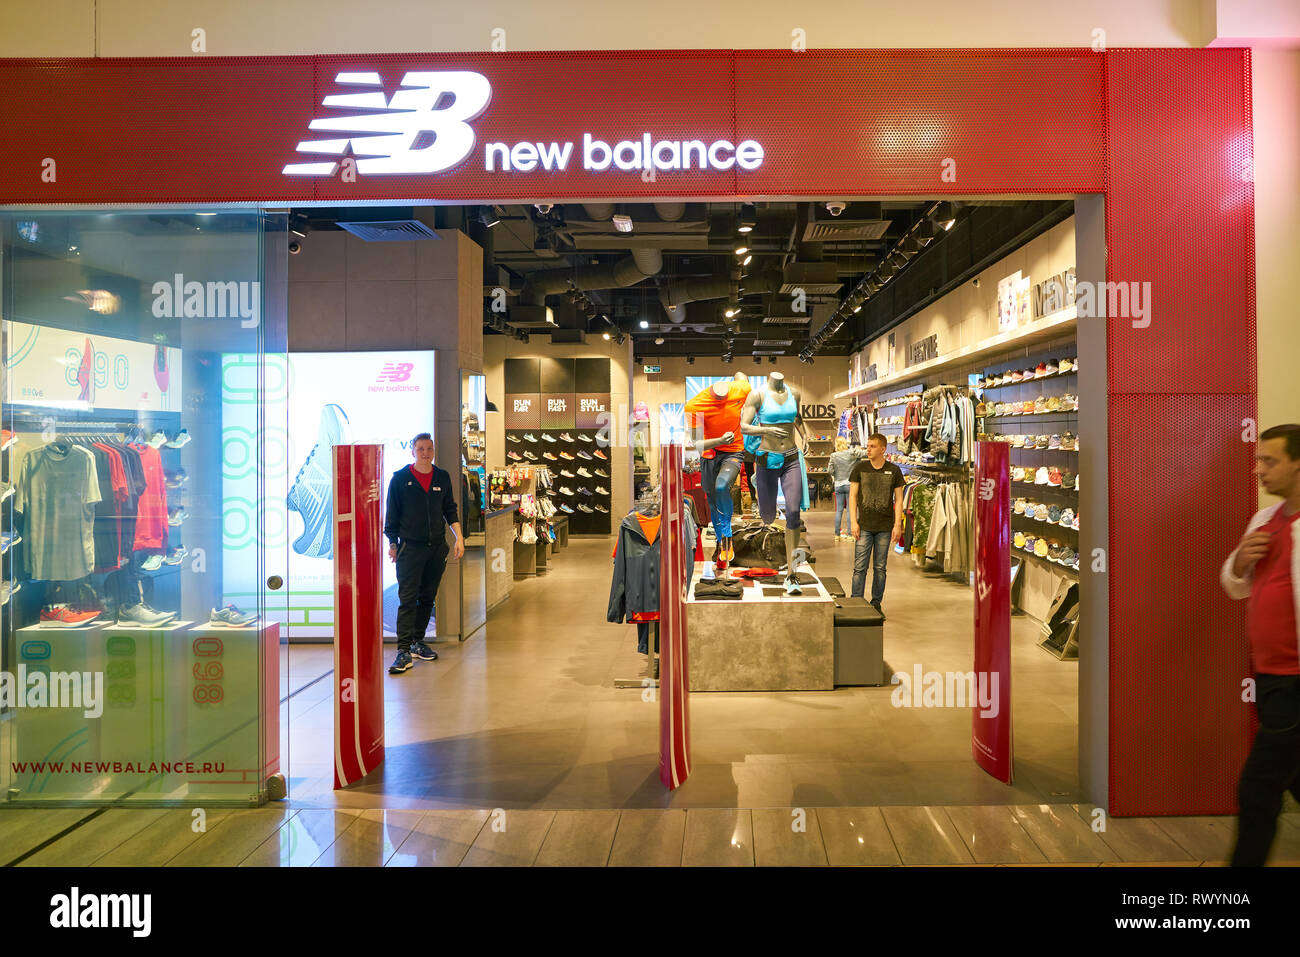 MOSCOW, RUSSIA - CIRCA SEPTEMBER, 2018: New Balance brand name over  entrance to a store in Moscow. New Balance Athletics is an American  multinational Stock Photo - Alamy